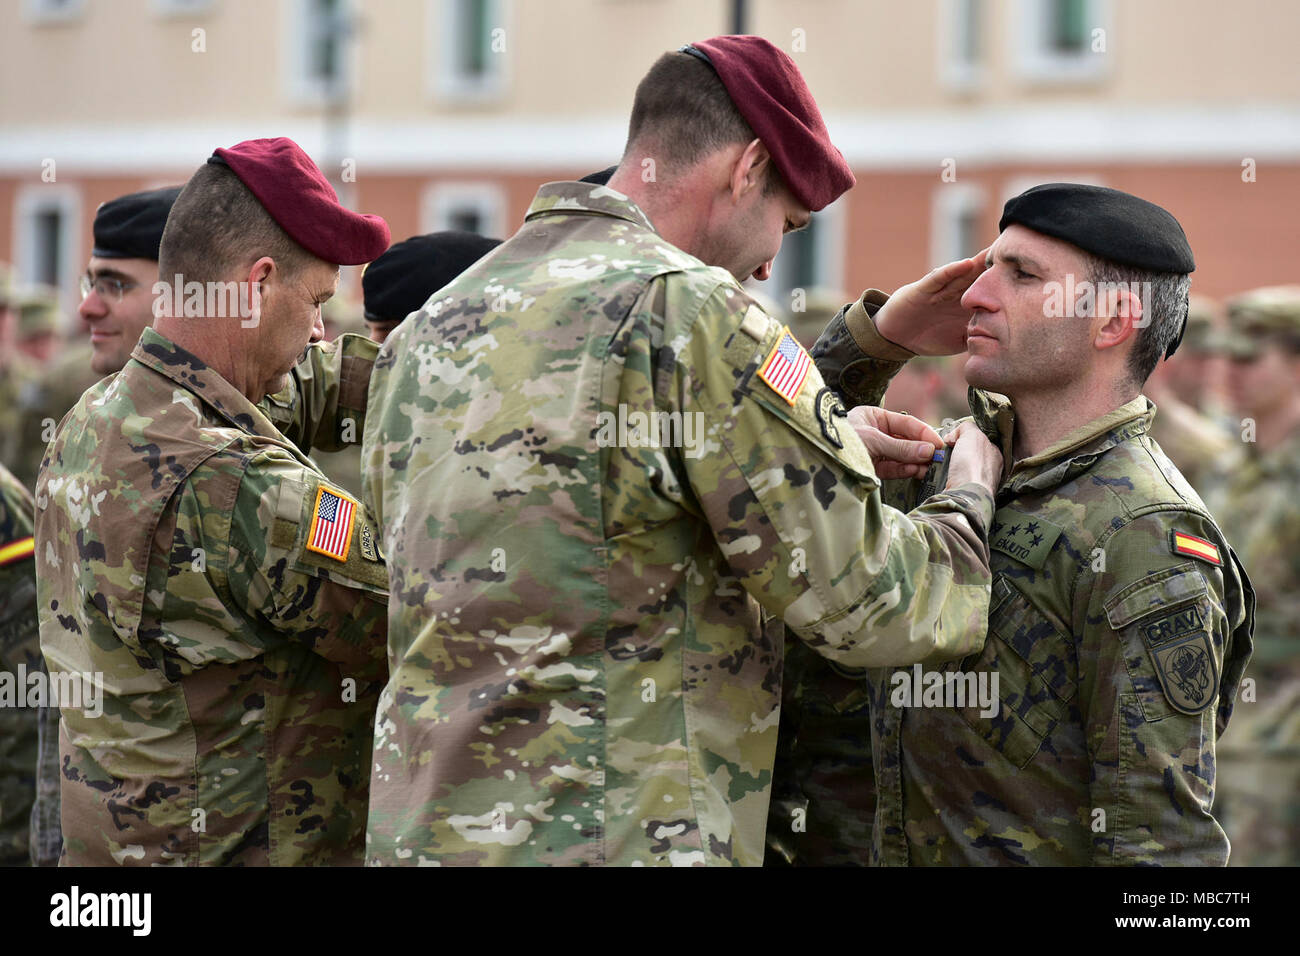 Col. James B. Bartholomees III, Commander of the 173rd Airborne Brigade (right) and Command Sgt. Maj. Franklin Velez of the 173rd Airborne Brigade (left), pin Expert Infantryman Badge’s (EIB) on Spanish Army Soldiers during Expert Infantryman Badge (EIB) ceremony at Caserma Del Din, Vicenza, Italy, 15 Feb. 2018. (U.S. Army Stock Photo